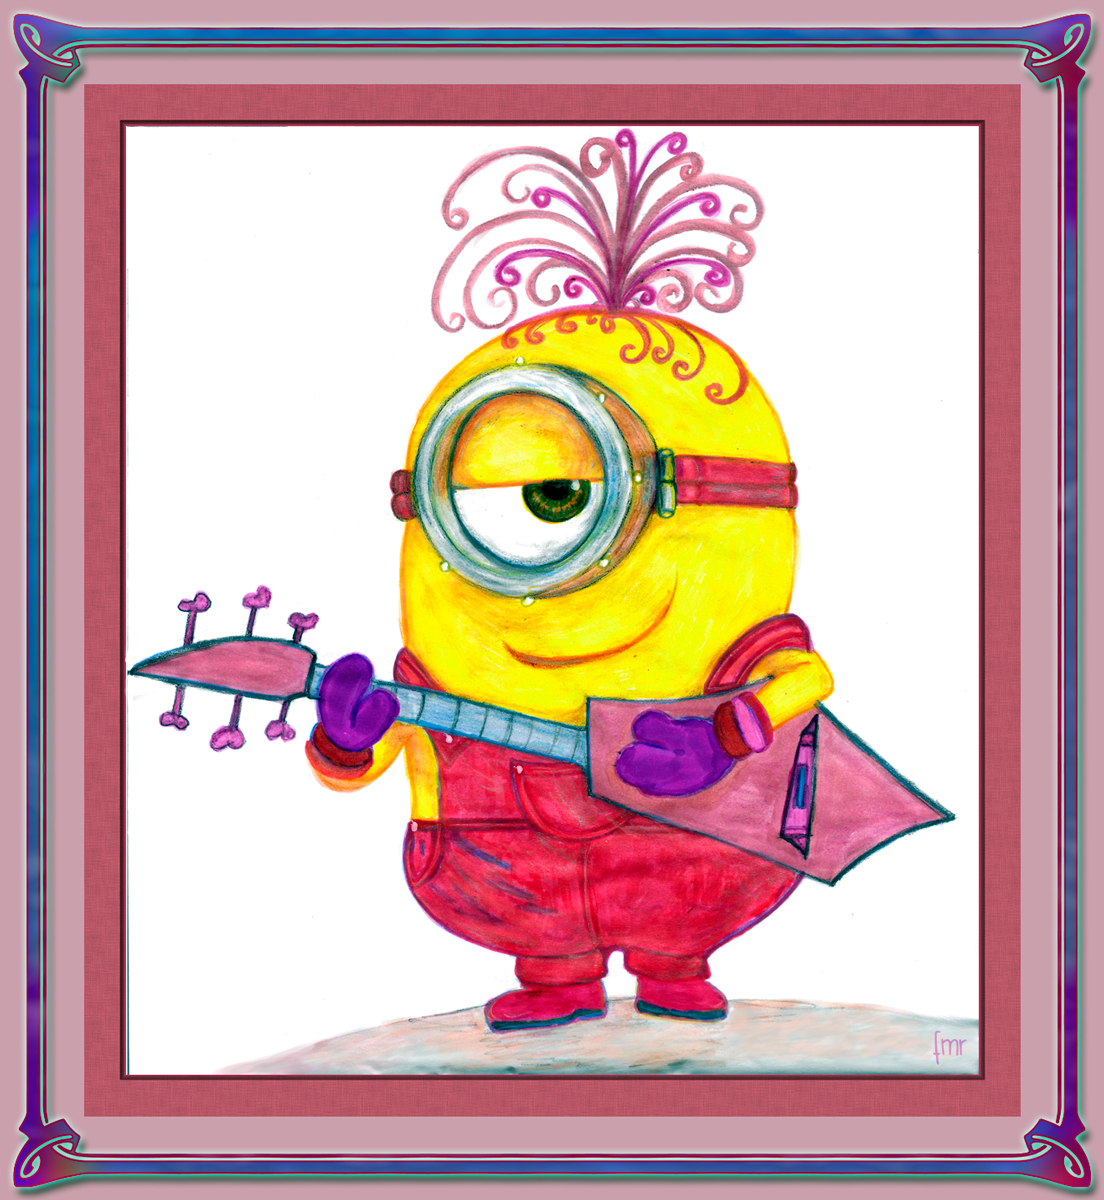 Minion Musician by Saltwater